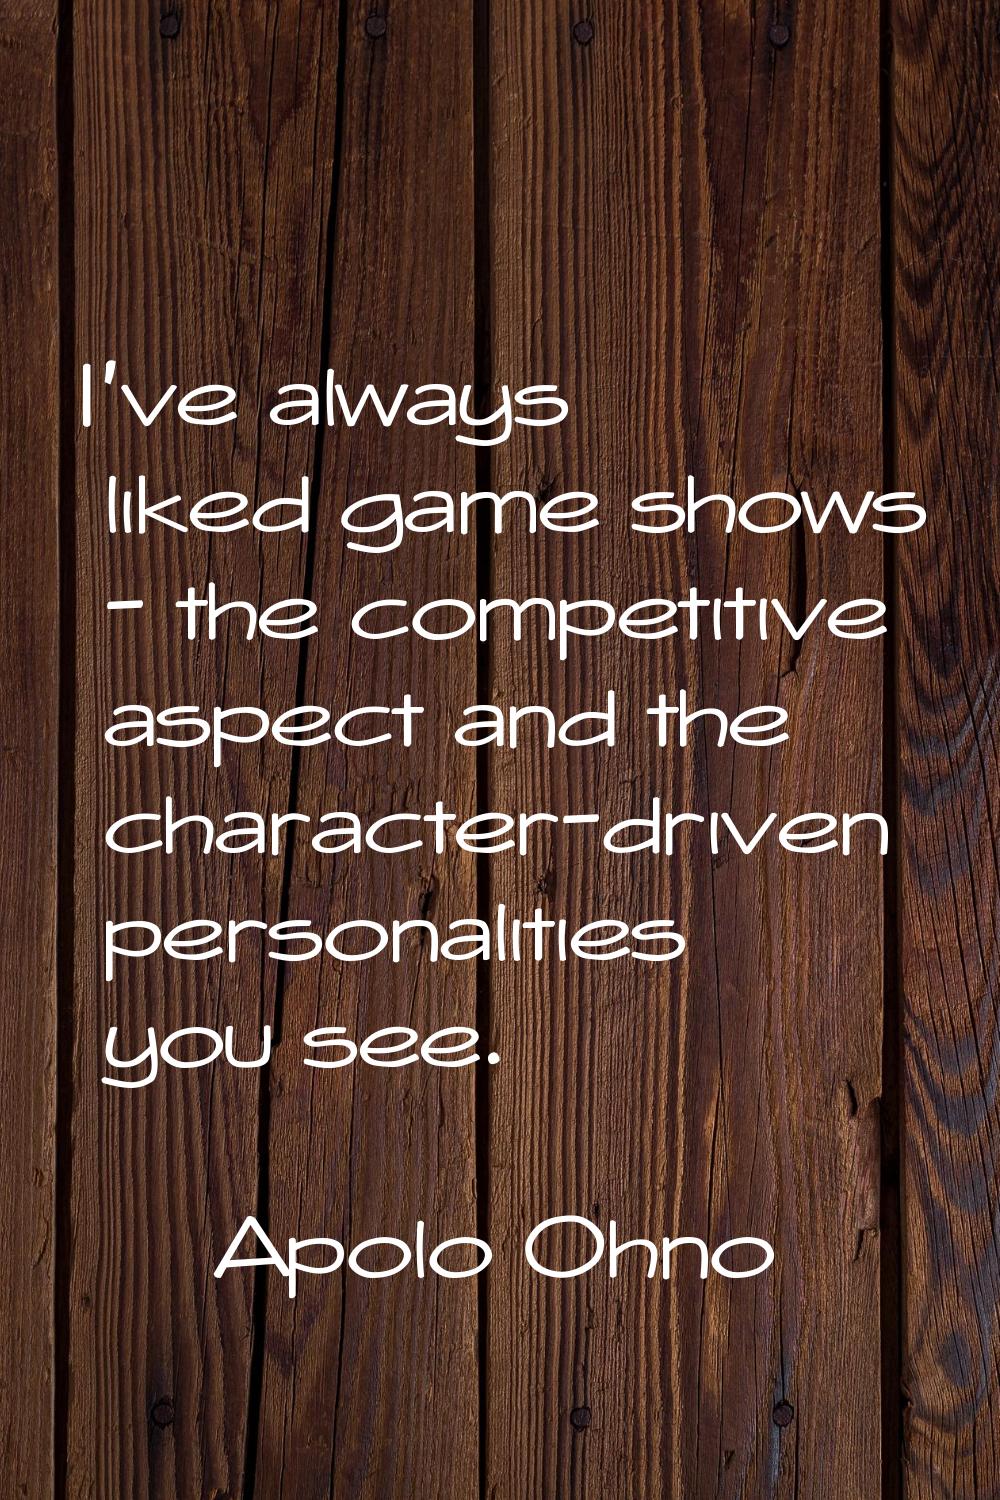 I've always liked game shows - the competitive aspect and the character-driven personalities you se